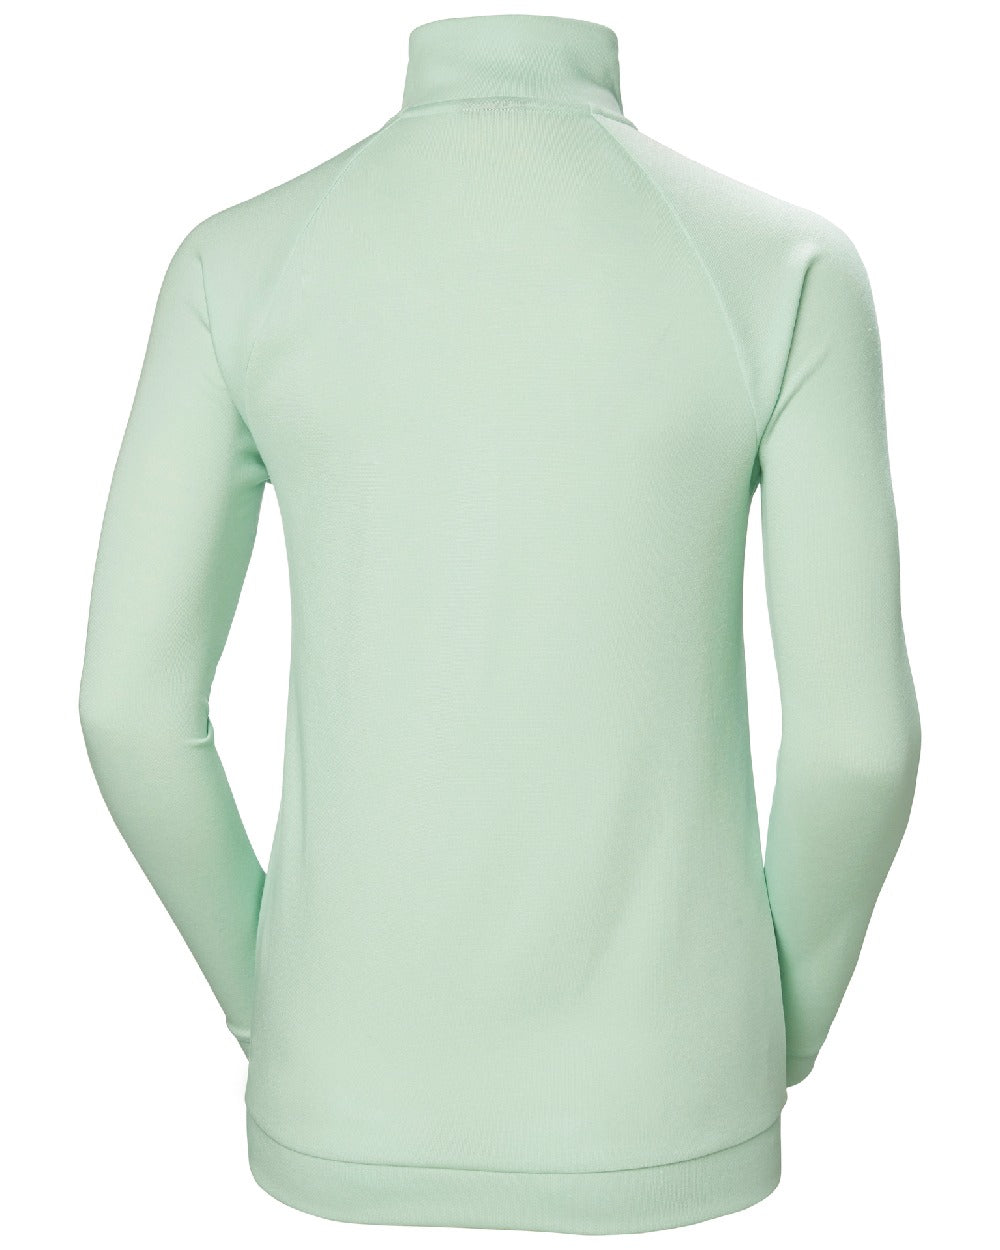 Mint coloured Helly Hansen Womens Inshore Half Zip Pullover on white background 